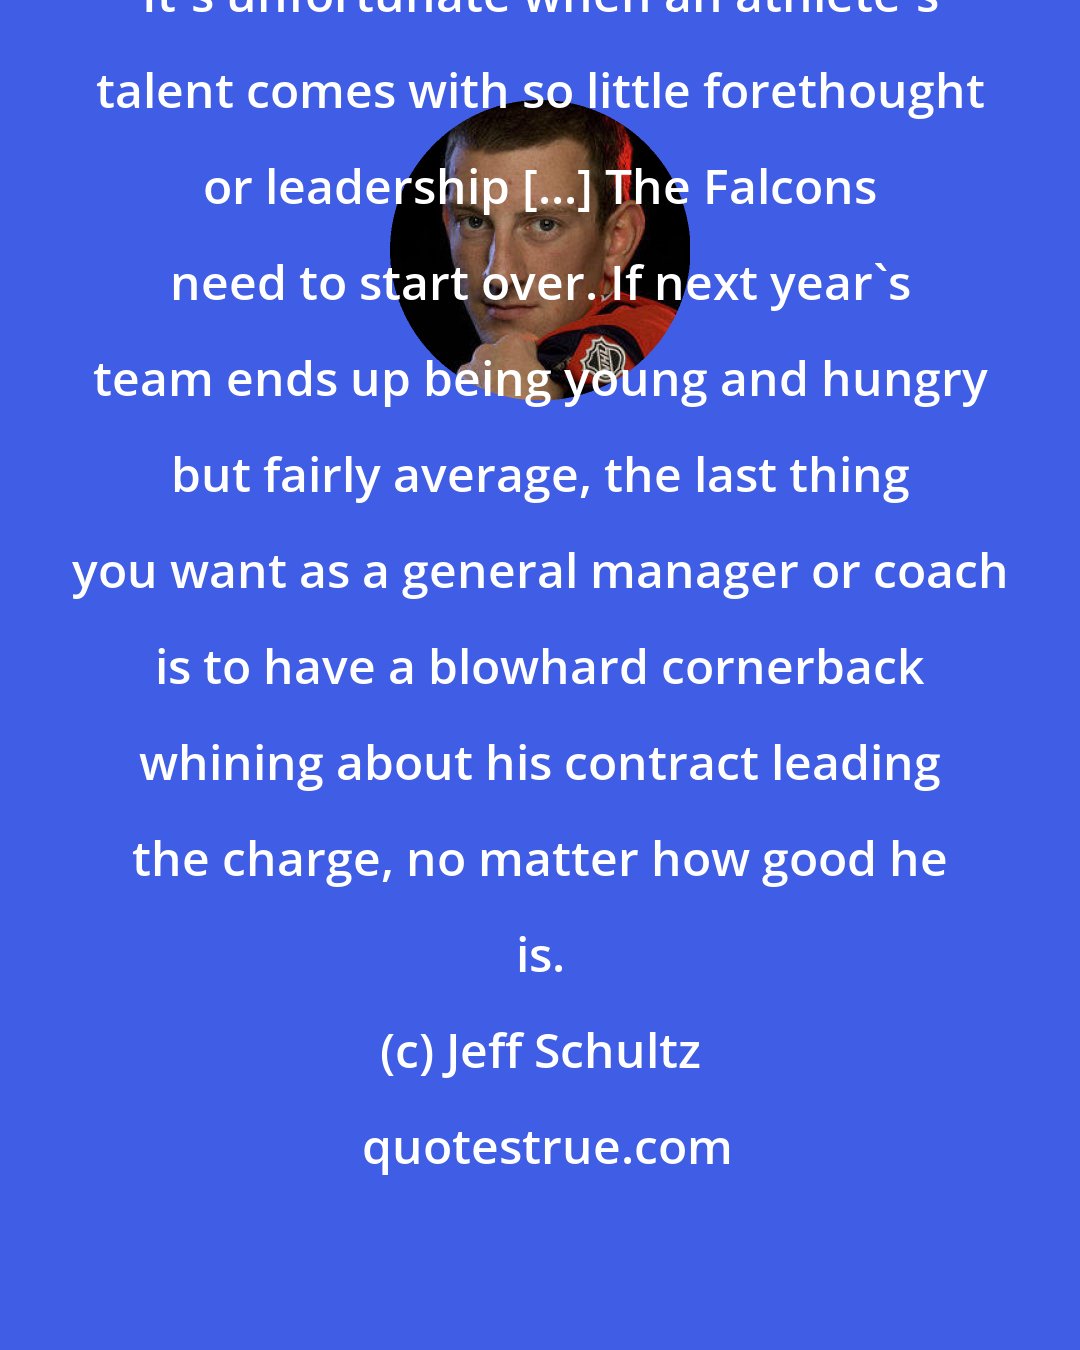 Jeff Schultz: It's unfortunate when an athlete's talent comes with so little forethought or leadership [...] The Falcons need to start over. If next year's team ends up being young and hungry but fairly average, the last thing you want as a general manager or coach is to have a blowhard cornerback whining about his contract leading the charge, no matter how good he is.